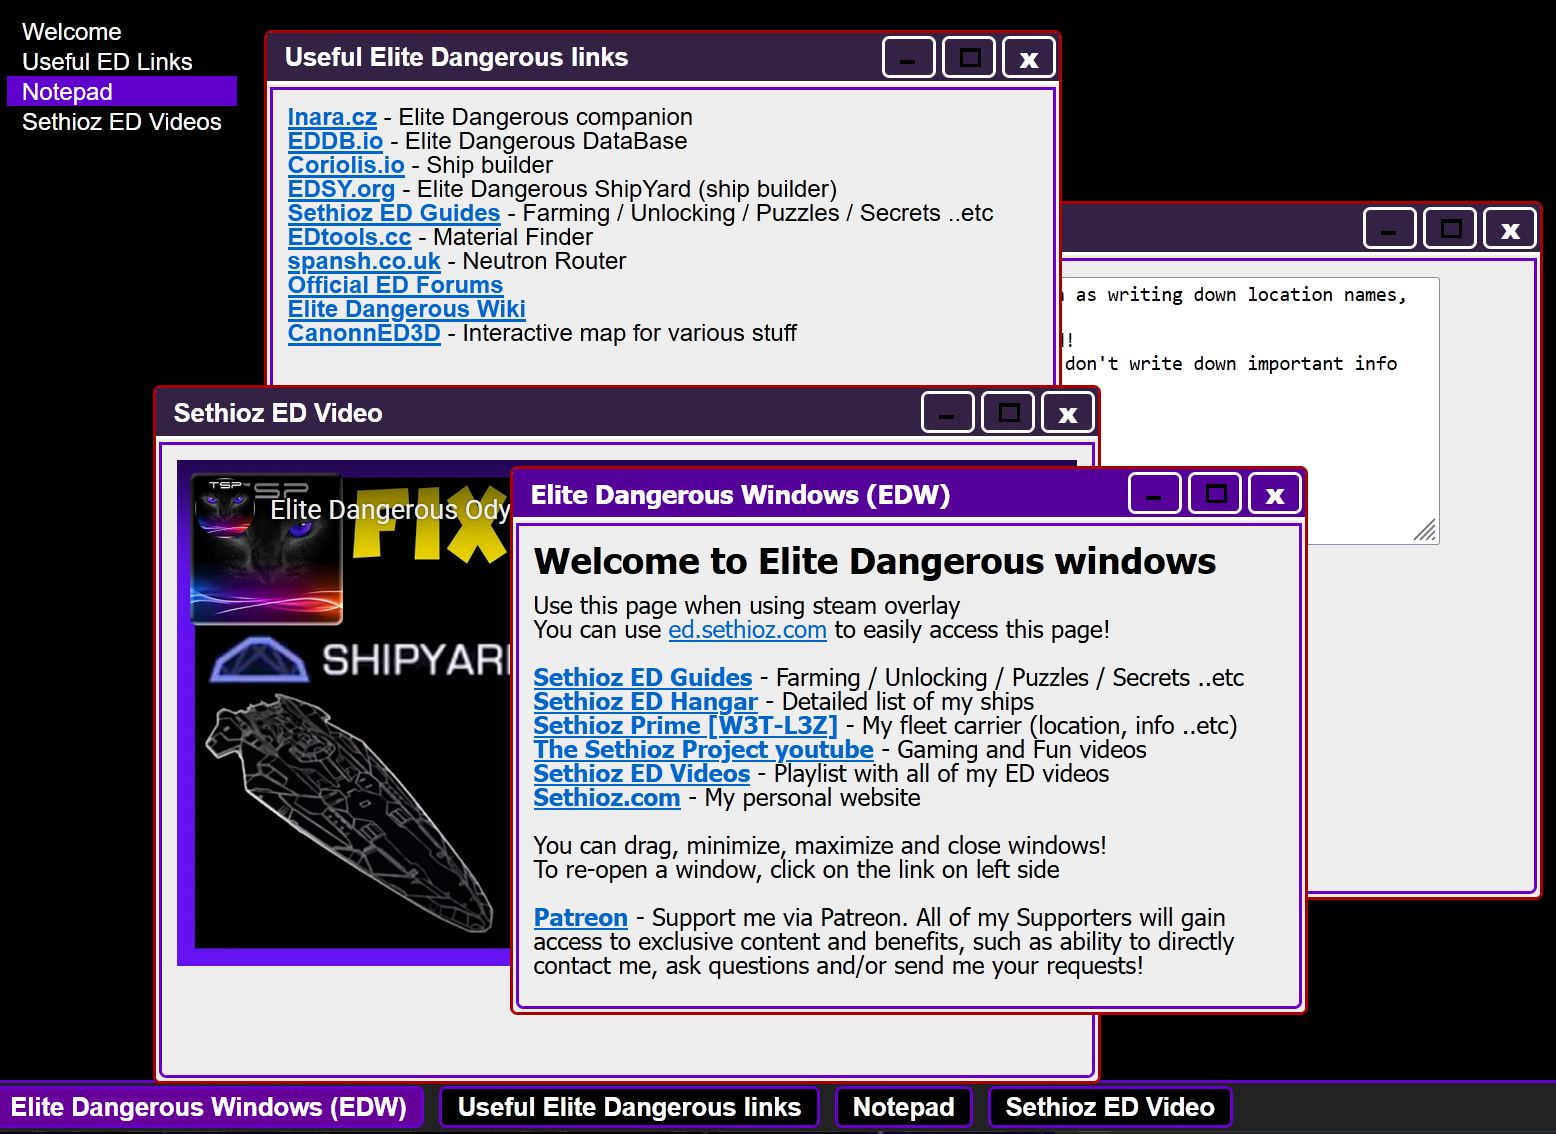 Discussion - Elite Dangerous Windows (EDW) - page for those who like using  Steam overlay | Frontier Forums